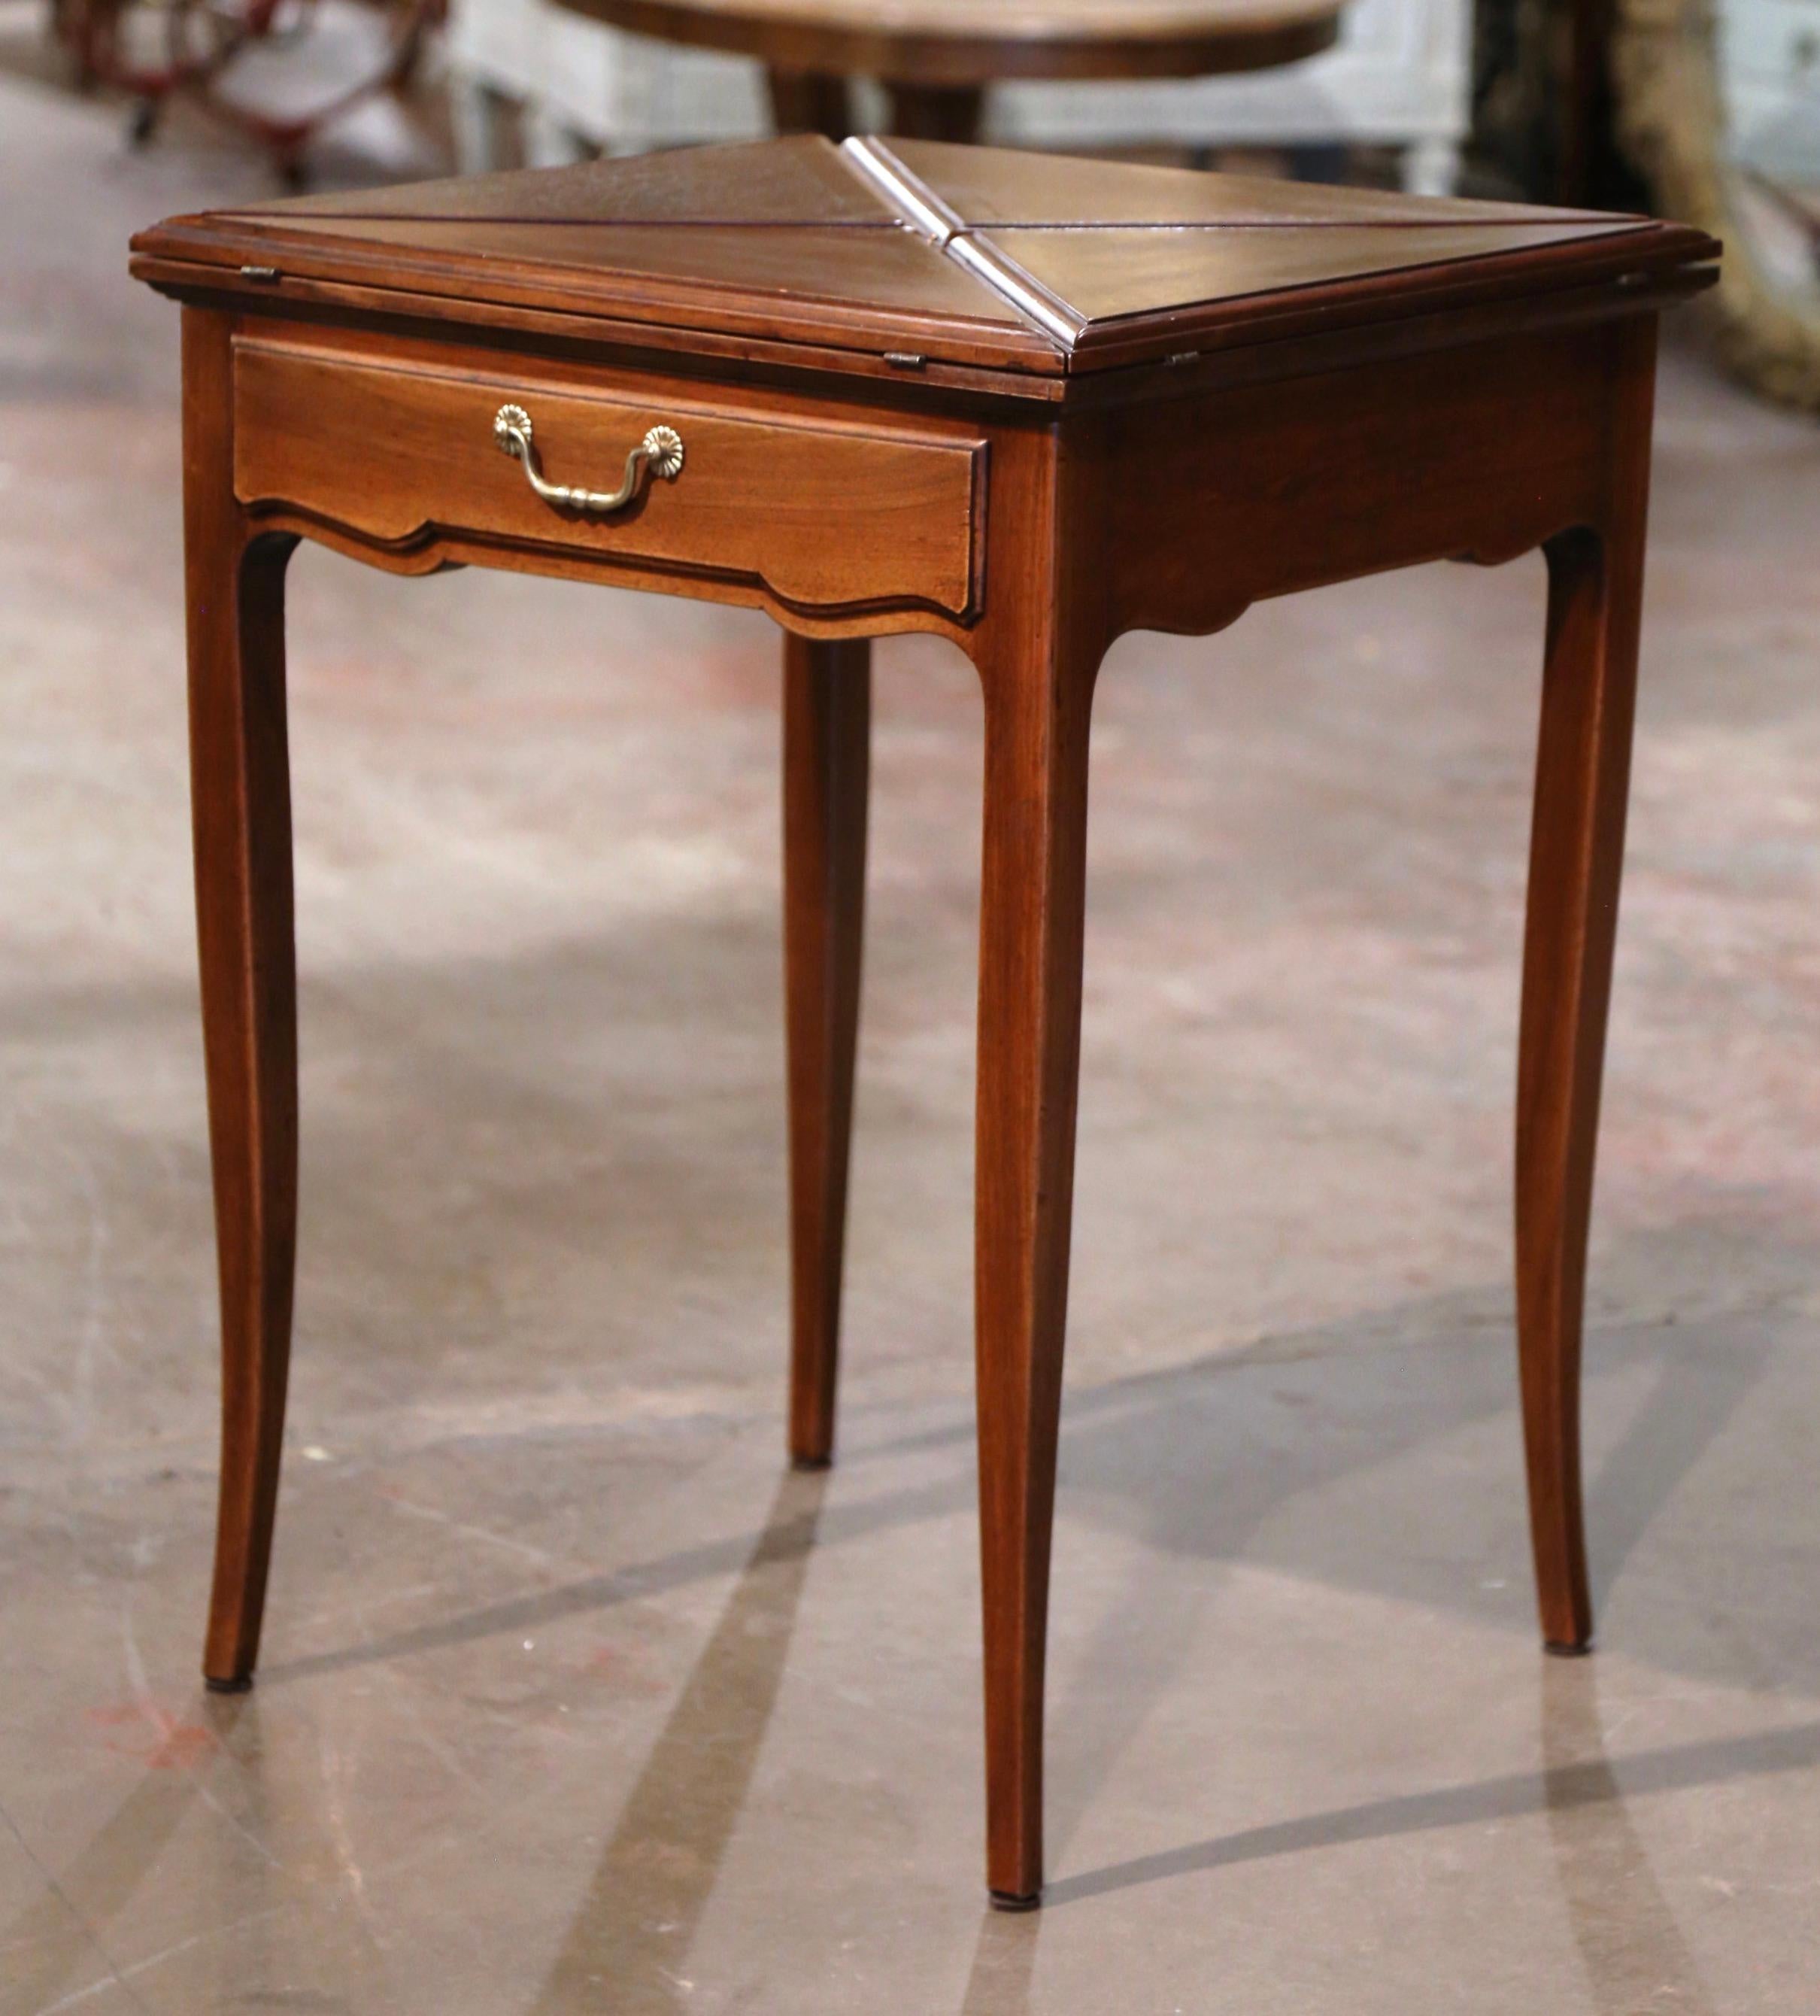 Decorate a game room or a den with this elegant folding card table. Crafted in France circa 1930 and built of mahogany wood with marquetry bands throughout, the square table stands on cabriole legs, over a scalloped apron dressed with a single